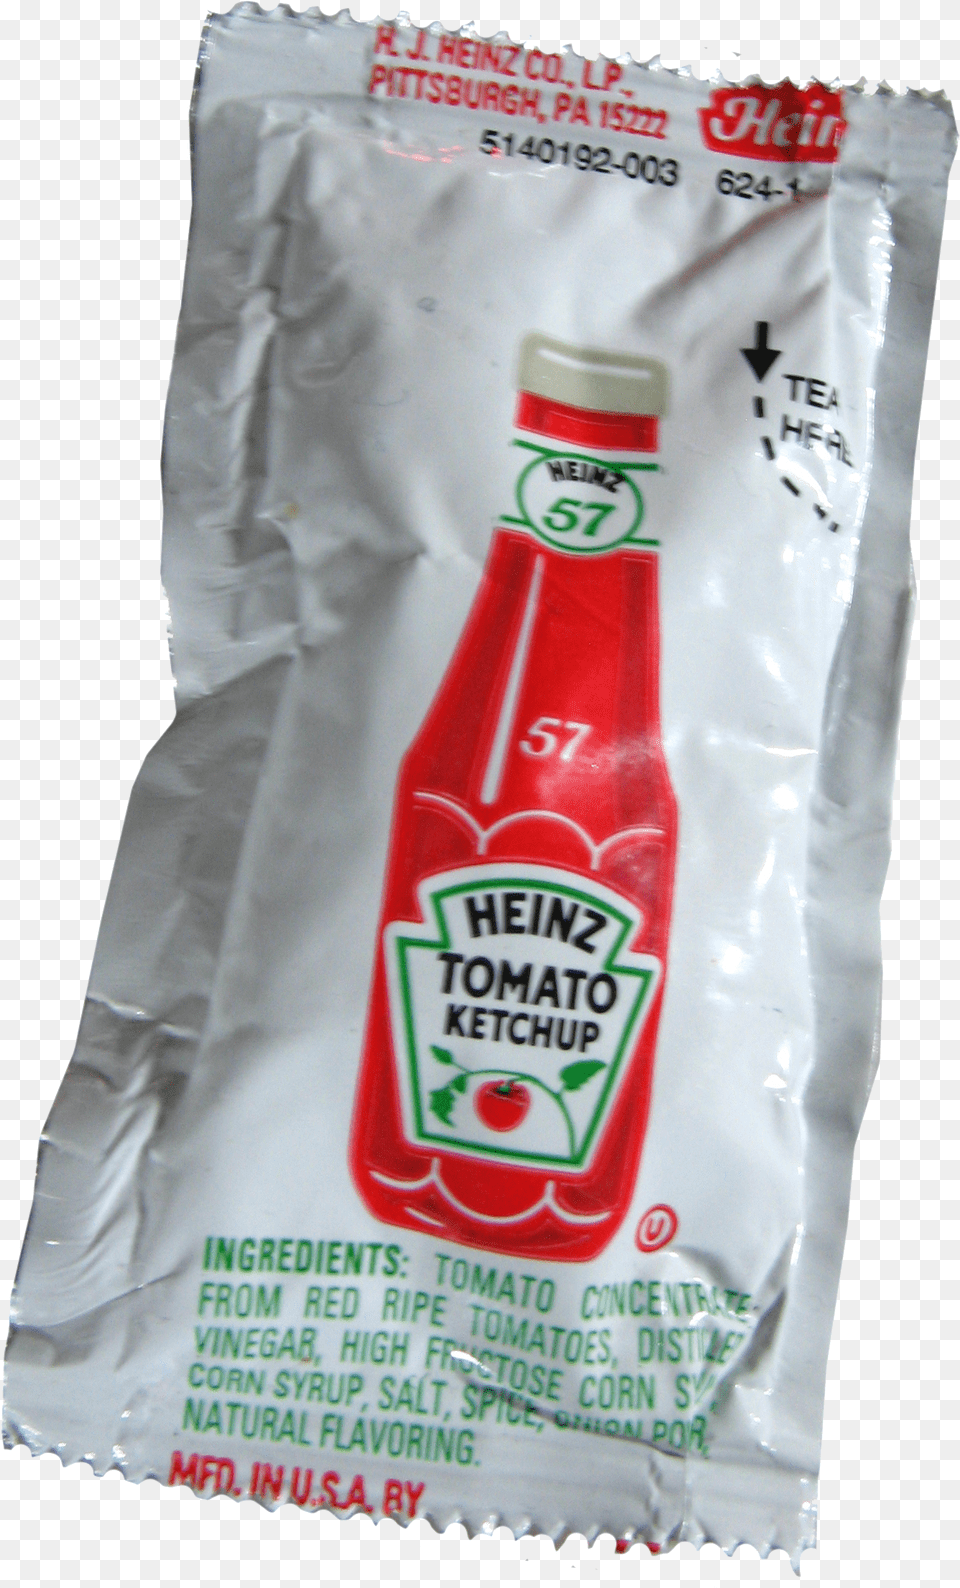 Heinz Tomato Ketchup Single Serve Dip And Squeeze Dippers Packet Png Image